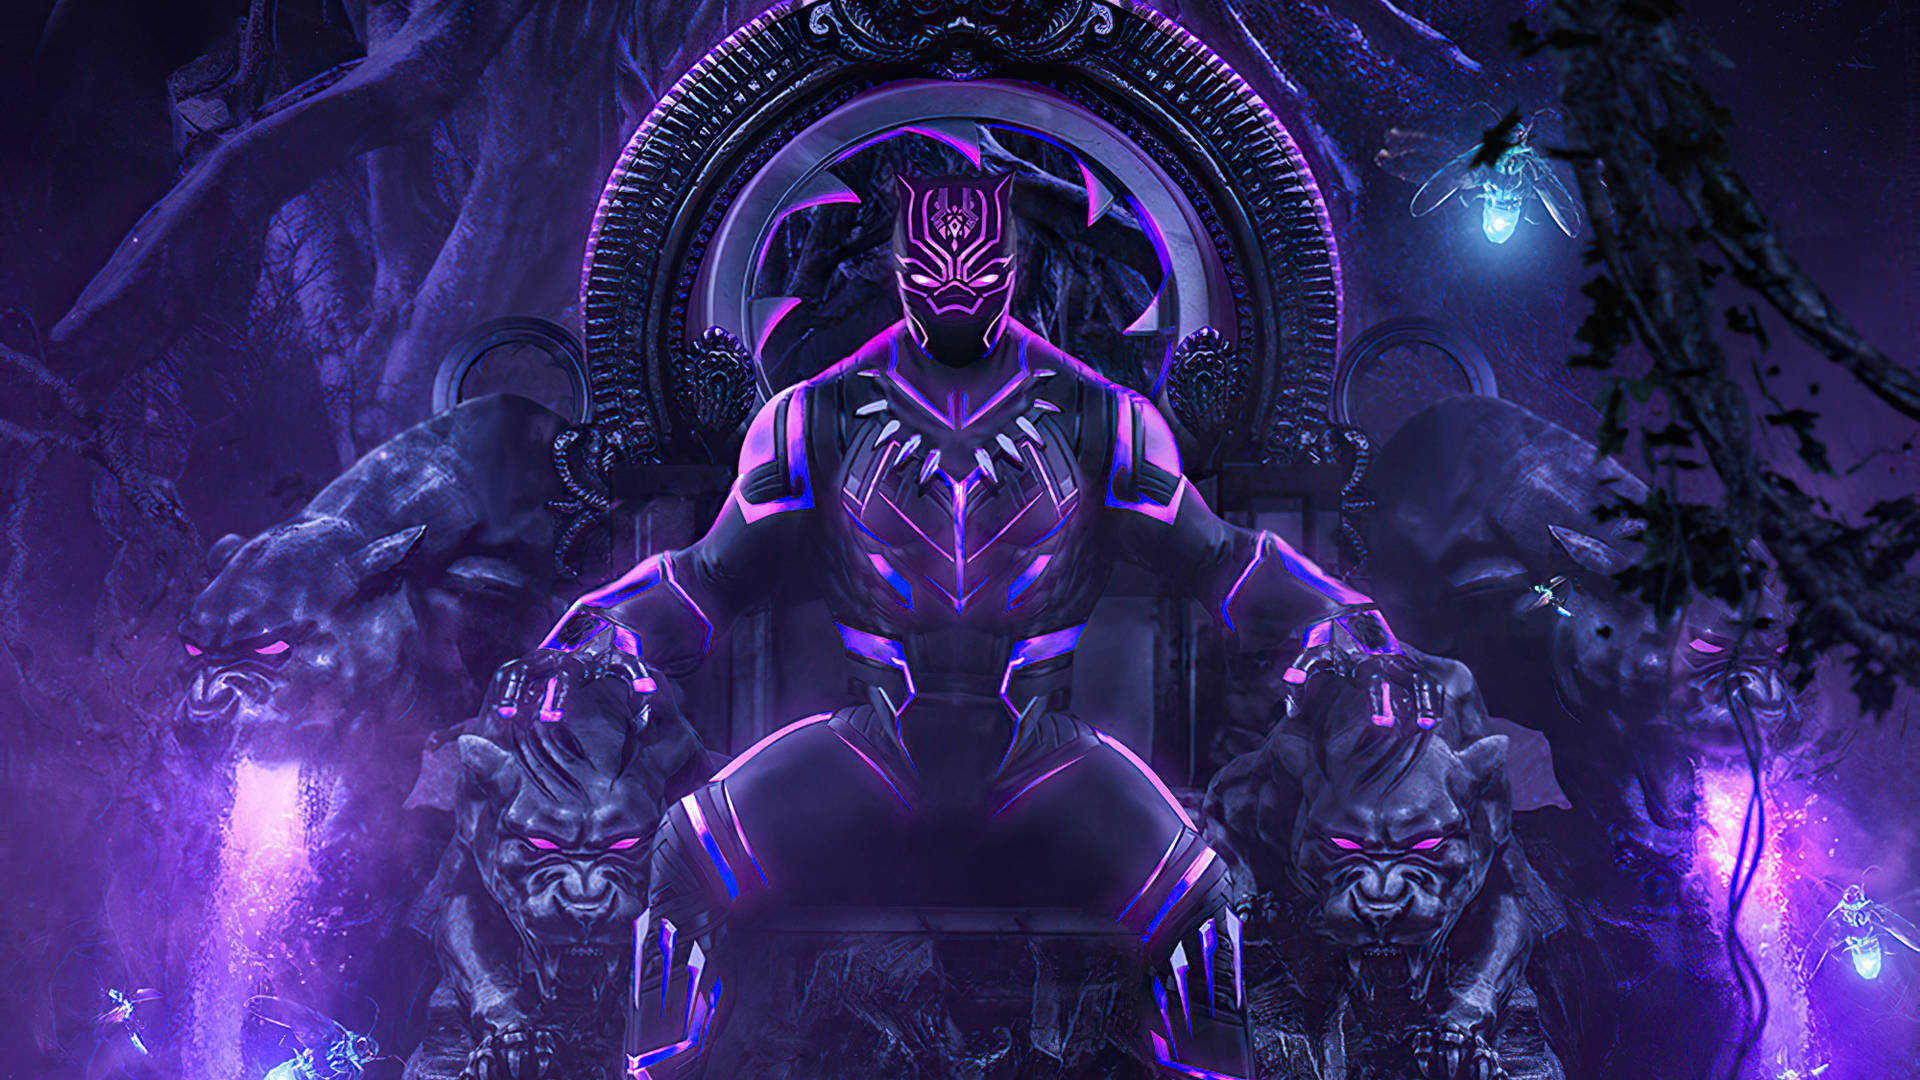 Black Panther In Throne Background